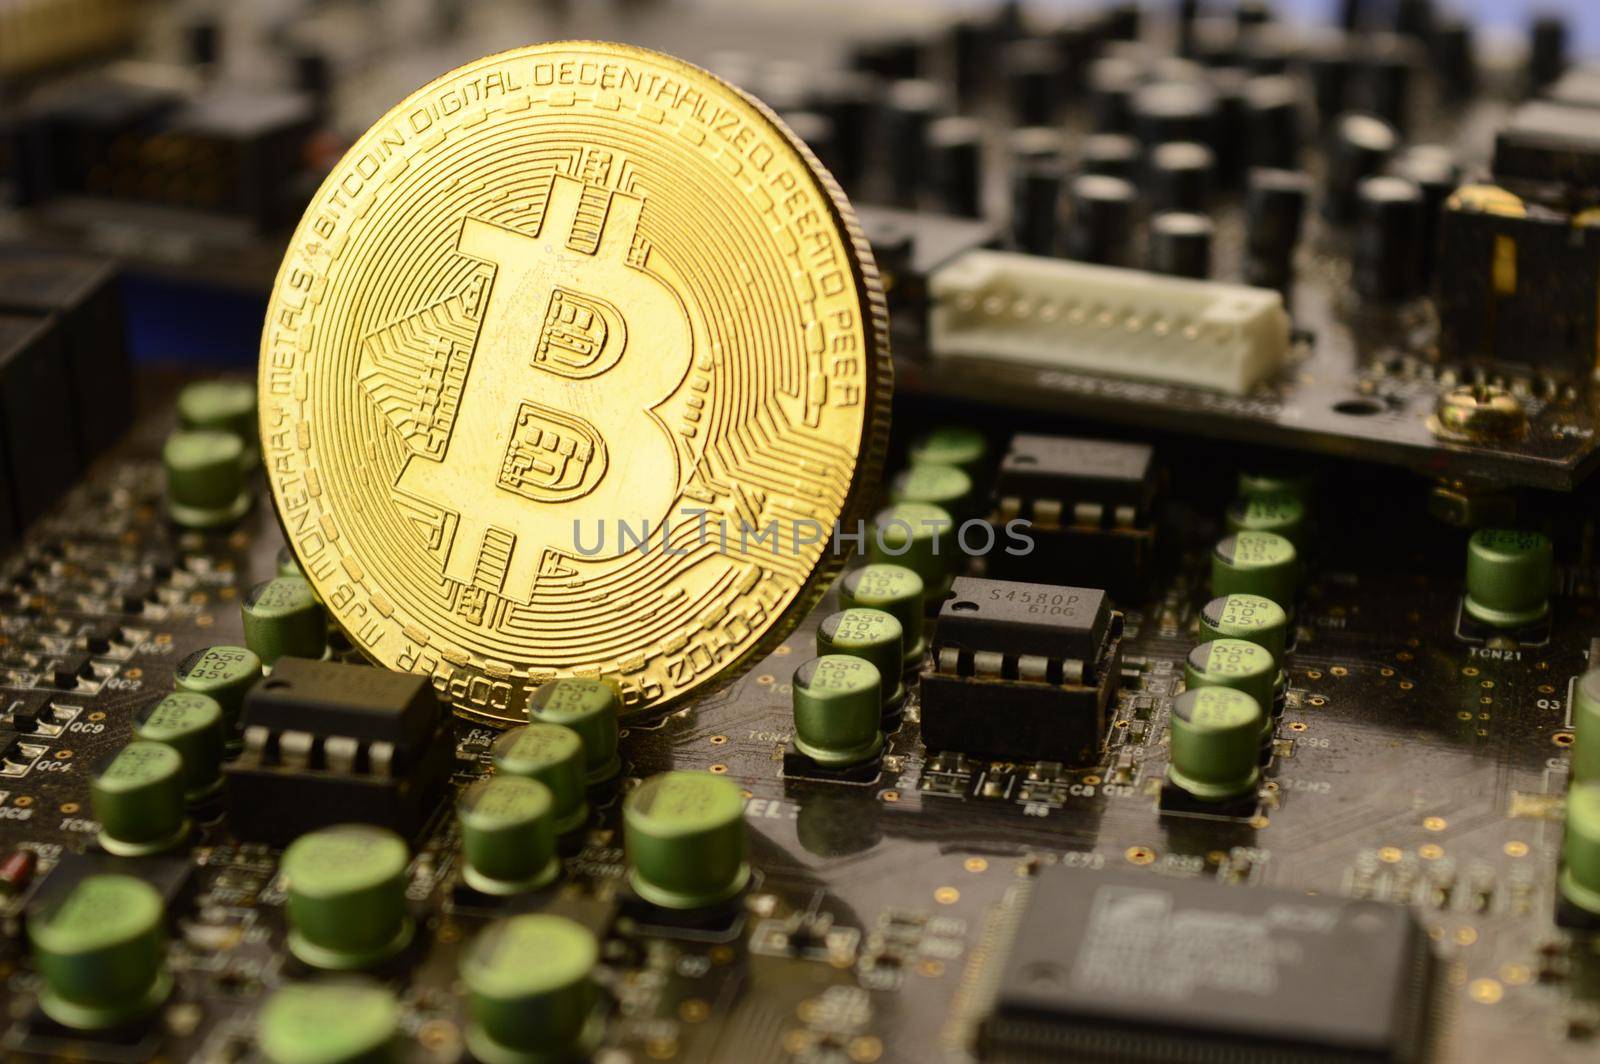 A closeup of a Bitcoin with some computer circuit boards to illustrate the decentralized banking system.